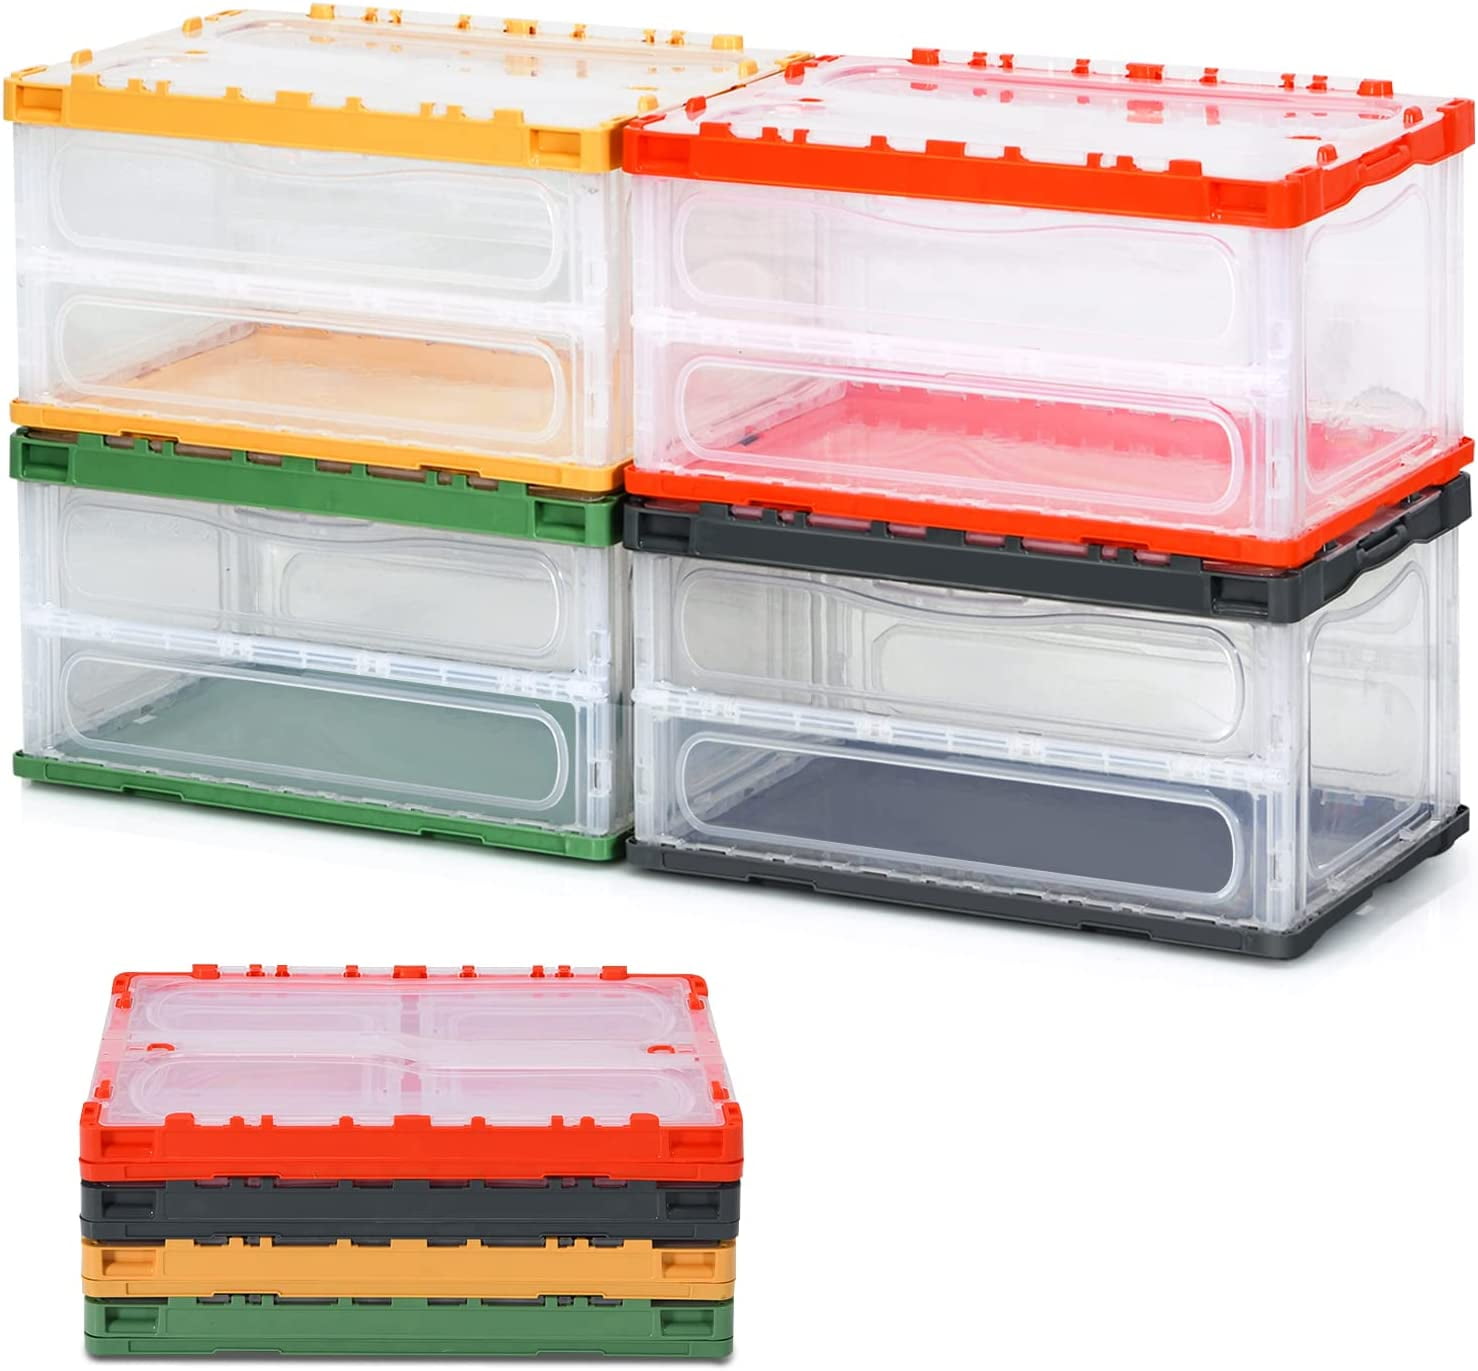  YYXB 4 Pack-Plastic Storage Bins with Lids and Handle